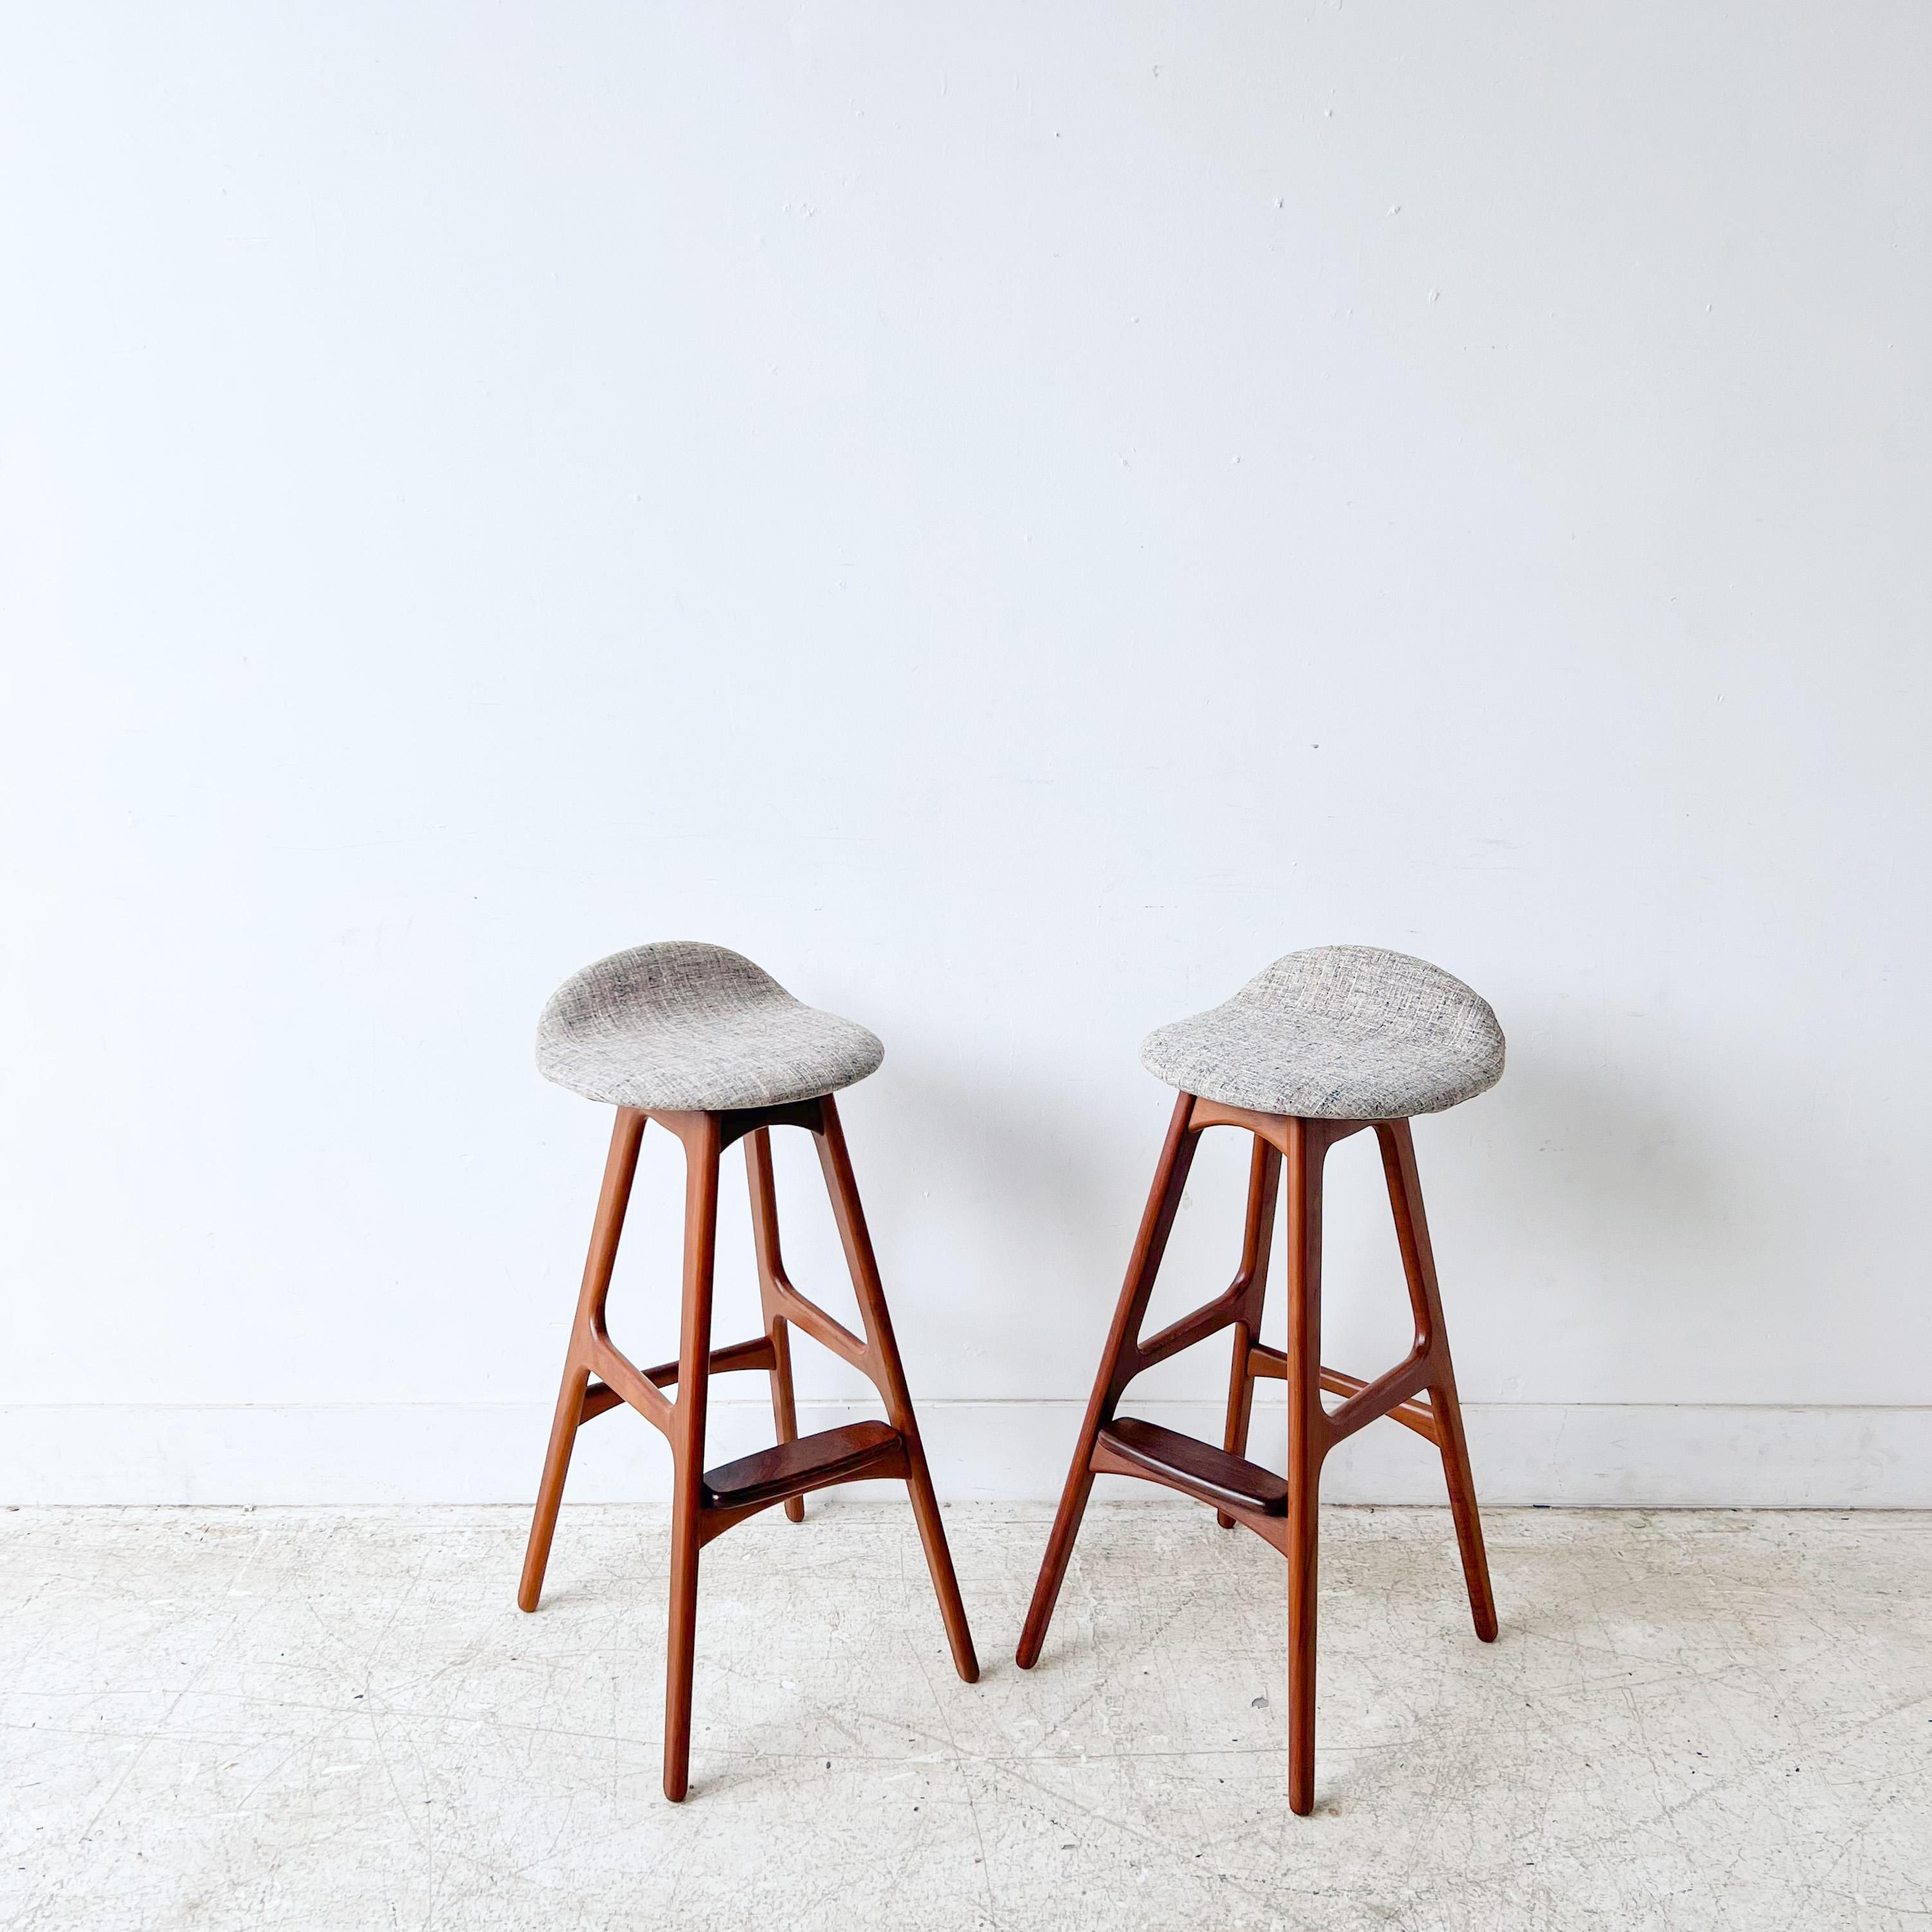 Pair of sleek bar height teak stools by Erik Buch for O.D. Møbler. Erik Buck is known for the Scandinavian and functional style of his pieces of furniture. Some light scuffing/scratching to the teak wooden frames from age/wear. New beige and grey